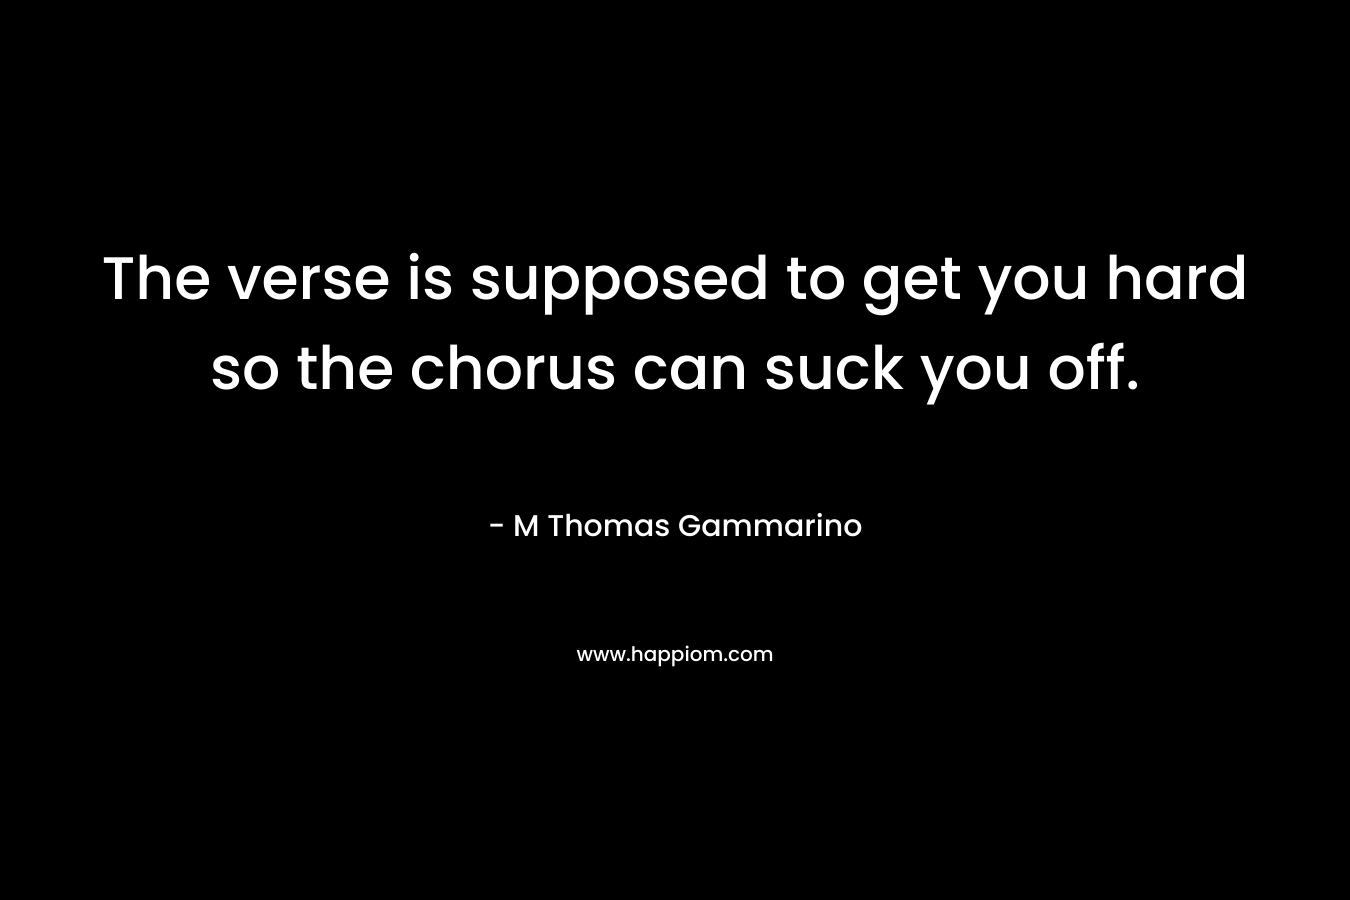 The verse is supposed to get you hard so the chorus can suck you off. – M Thomas Gammarino